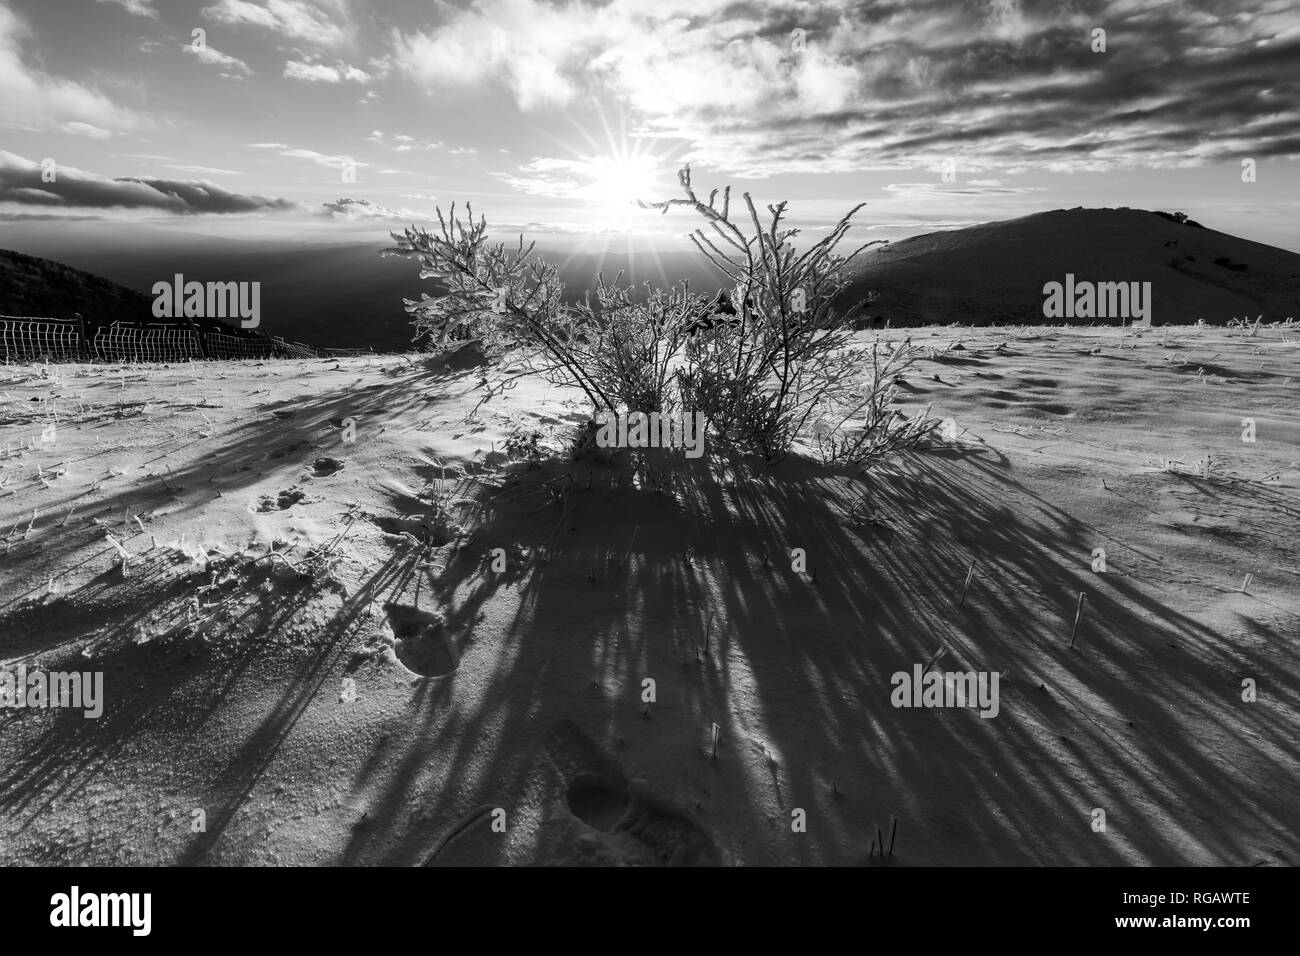 Subasio mountain (Umbria, Italy) in winter, covered by snow, with plants and sun Stock Photo